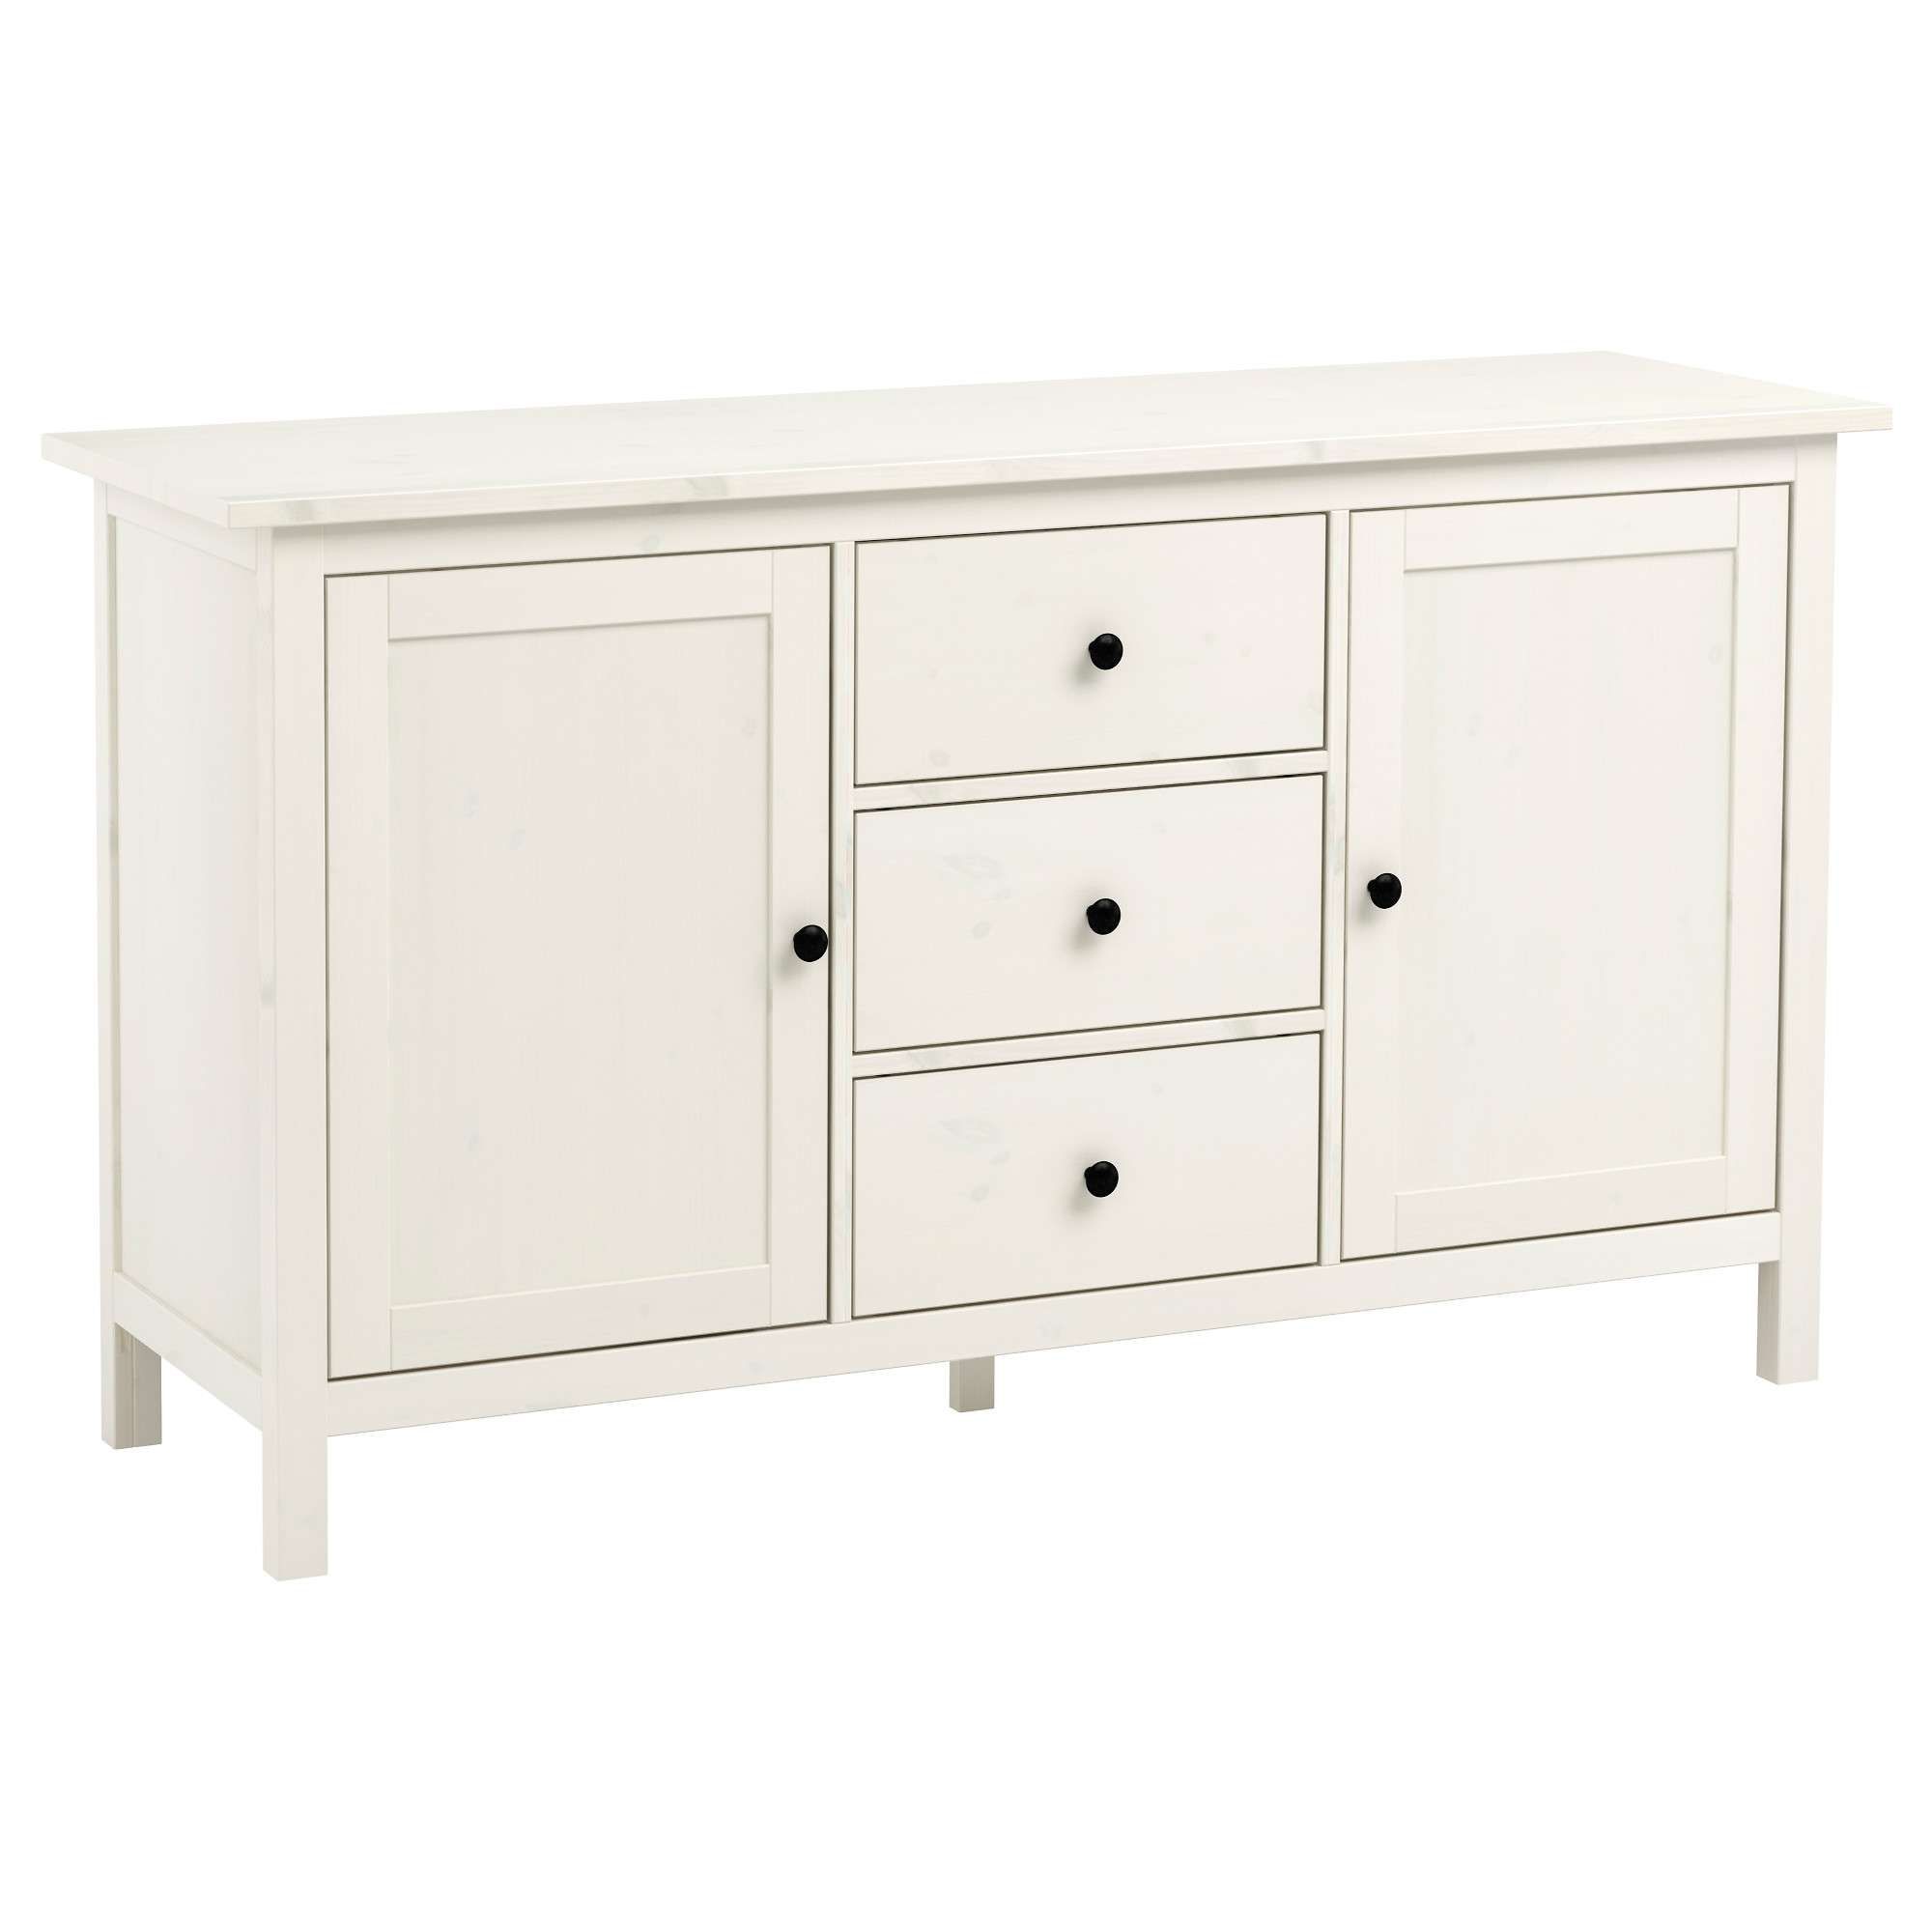 Hemnes Sideboard – White Stain – Ikea With Regard To White Sideboards Cabinets (View 1 of 20)